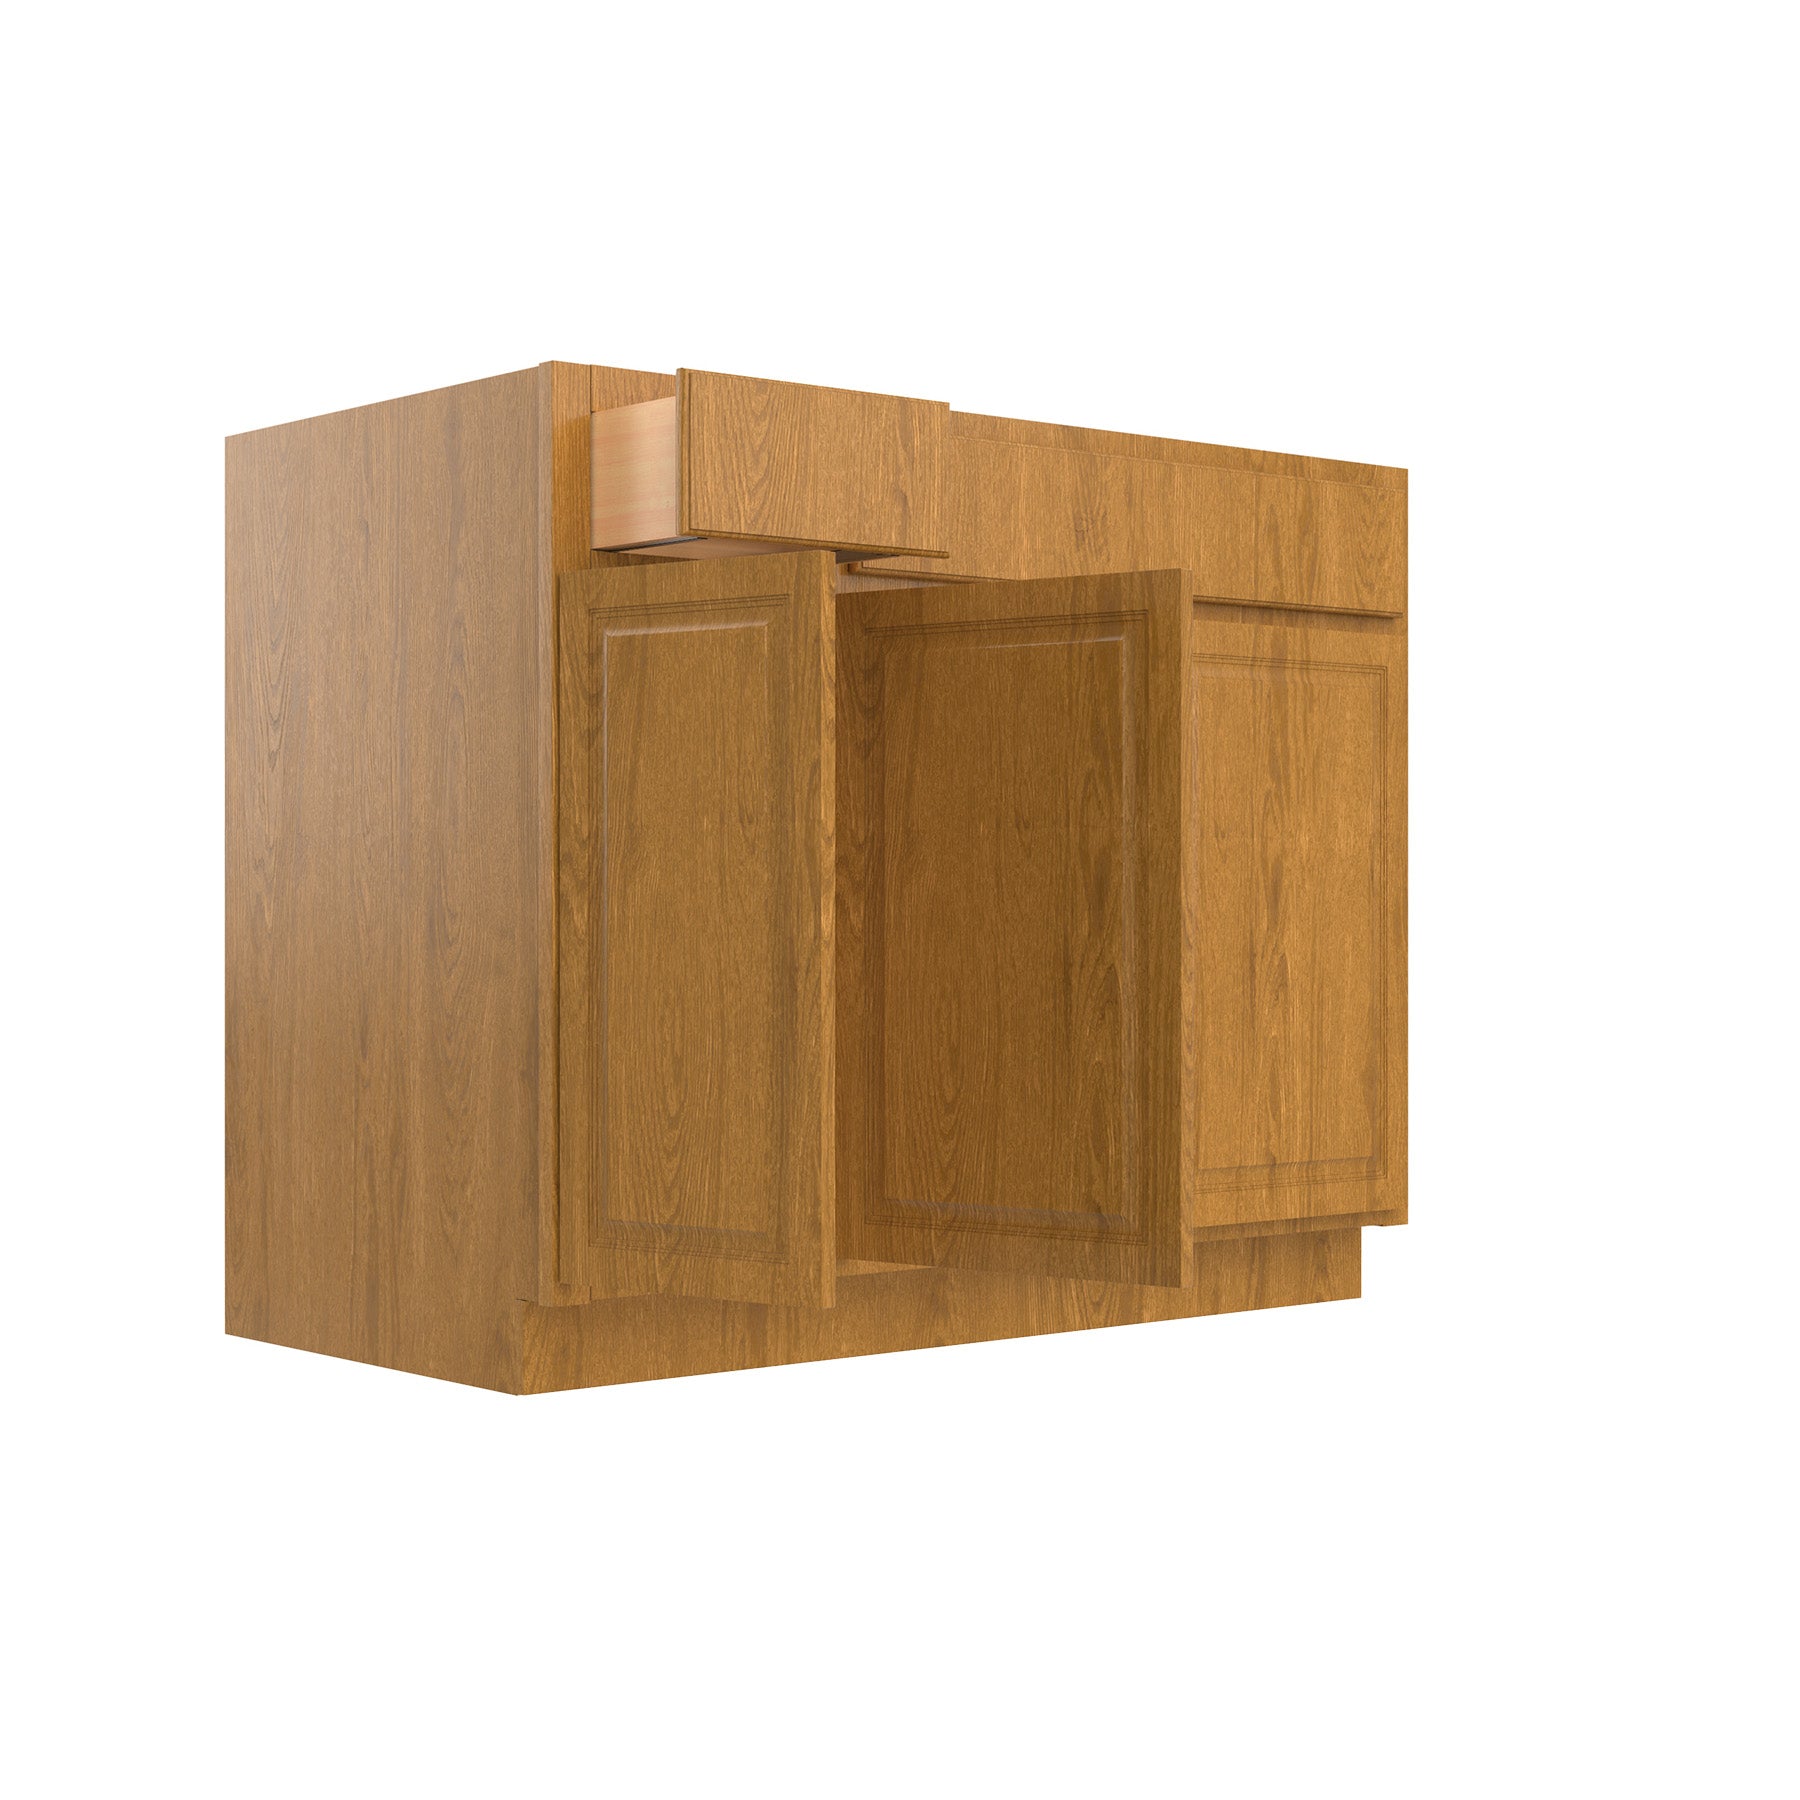 Country Oak 42"W x 34.5"H Sink Base Cabinet, Left Drawers